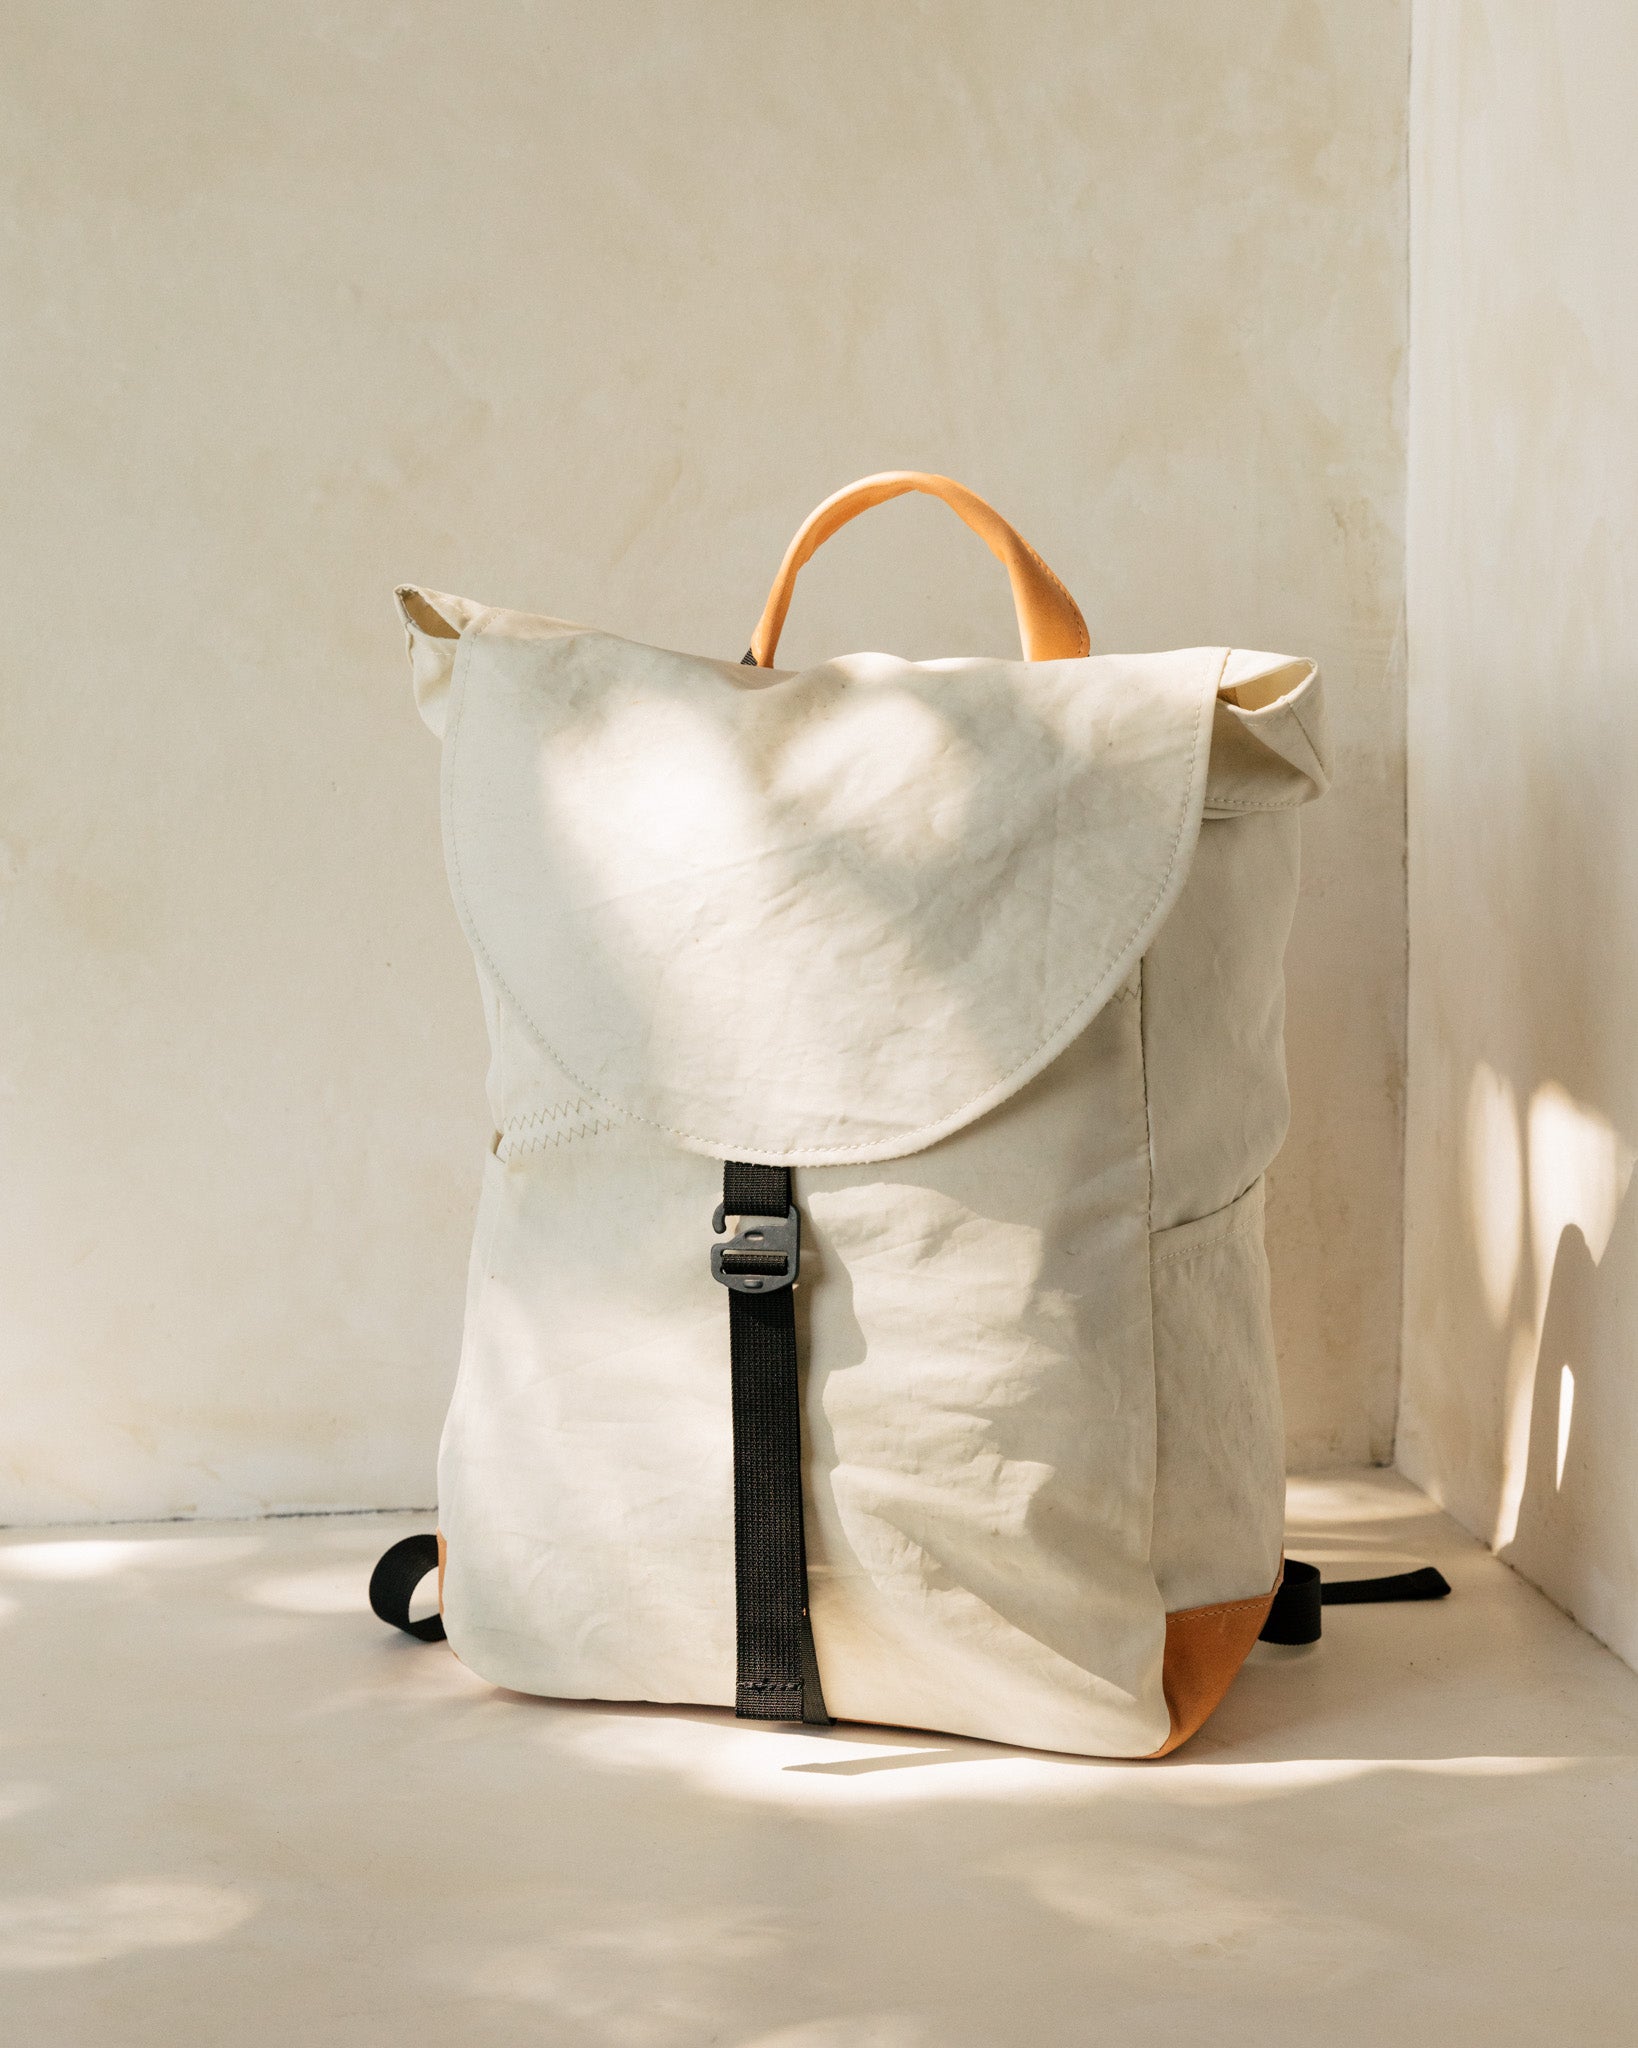 Landfall Leatherworks — The Provisioner Sailcloth Tote Bag